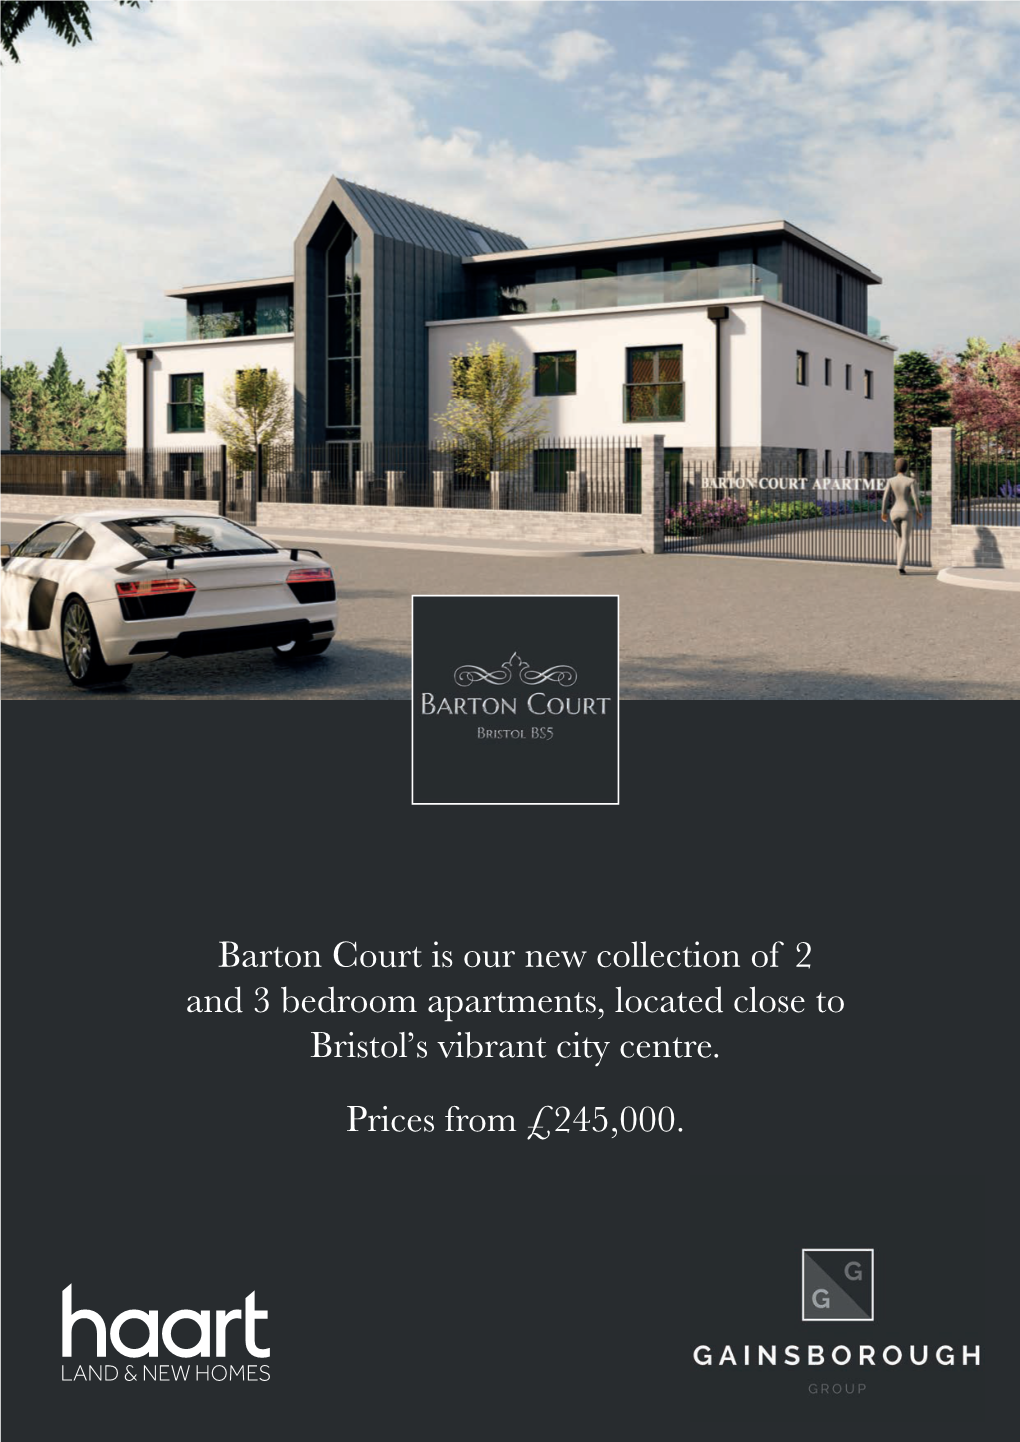 Barton Court Is Our New Collection of 2 and 3 Bedroom Apartments, Located Close to Bristol’S Vibrant City Centre